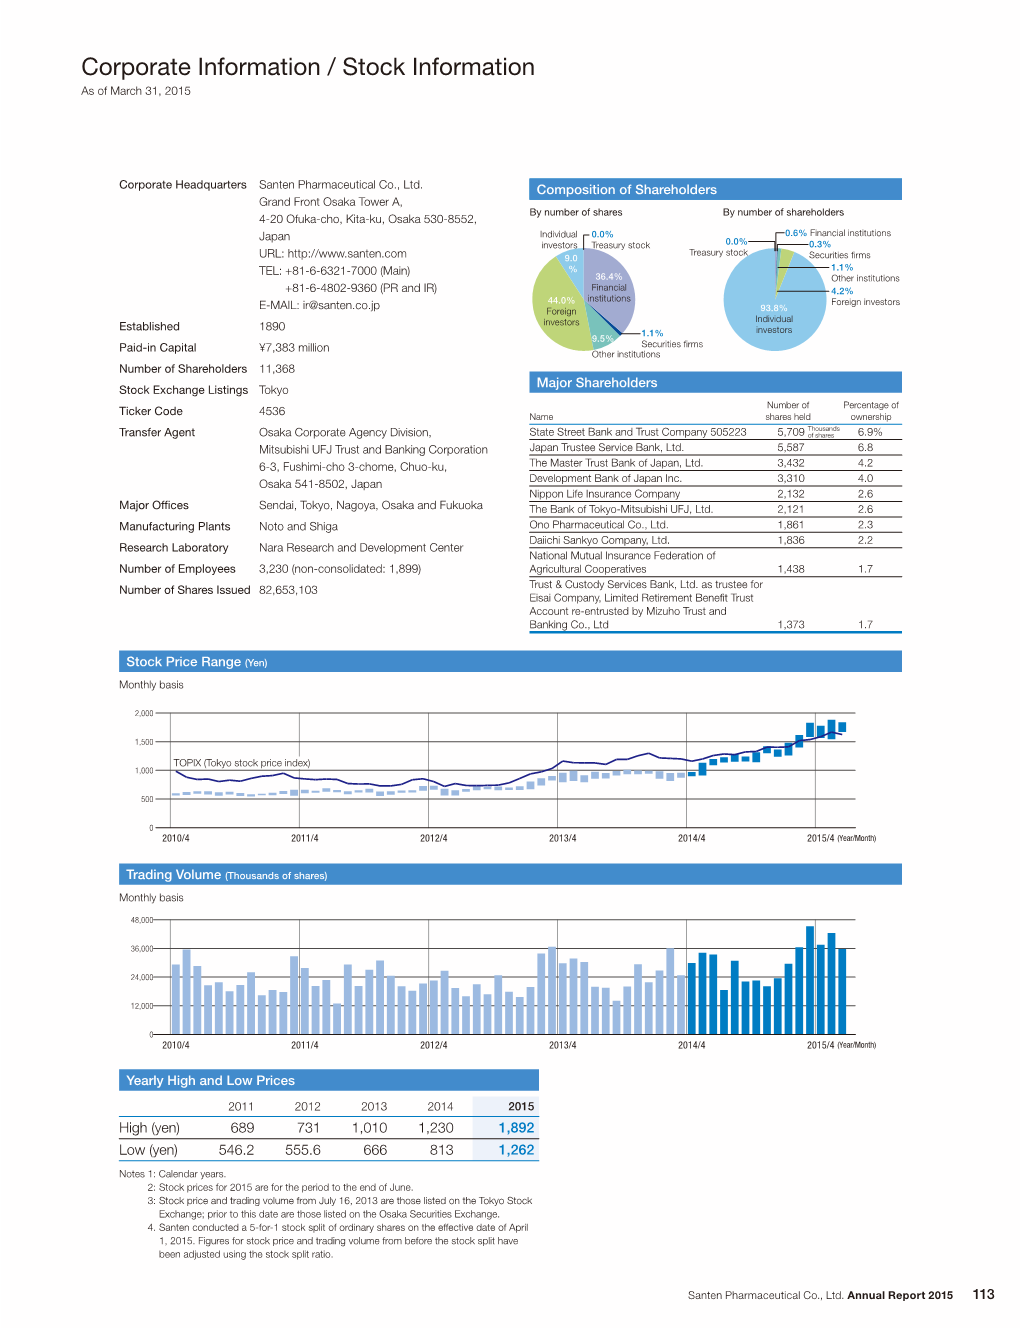 Corporate Information / Stock Information As of March 31, 2015